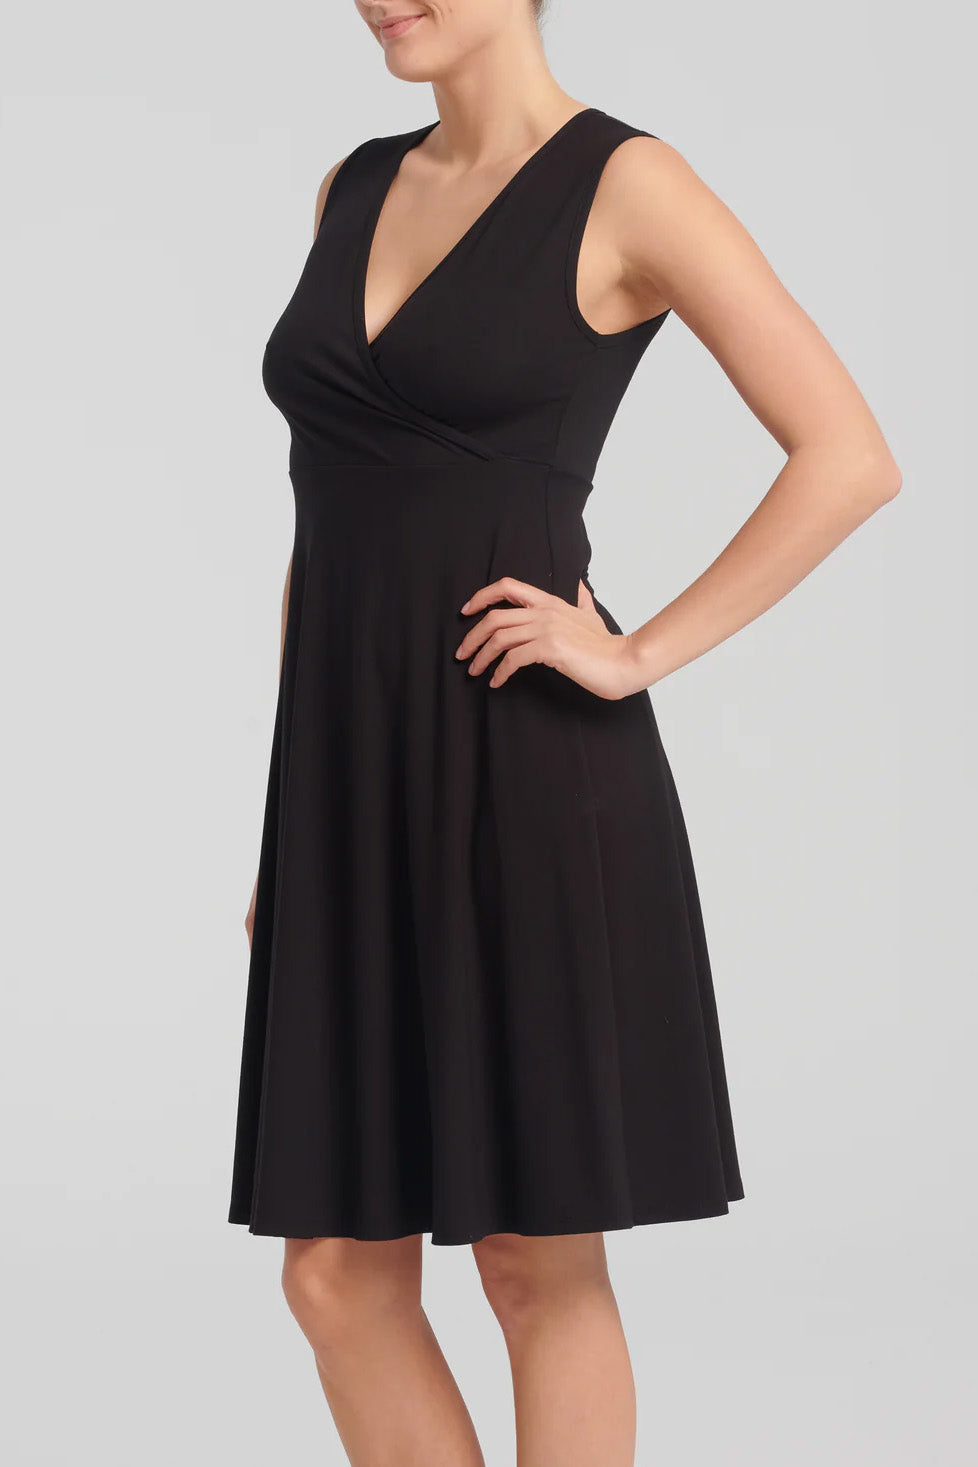 Ayesha Dress by Kollontai, Black, wrap-over neckline, wide straps, empire waist, loose fit through the bodice, knee-length, pill-resistant viscose, sizes XS-XXL, made in Quebec